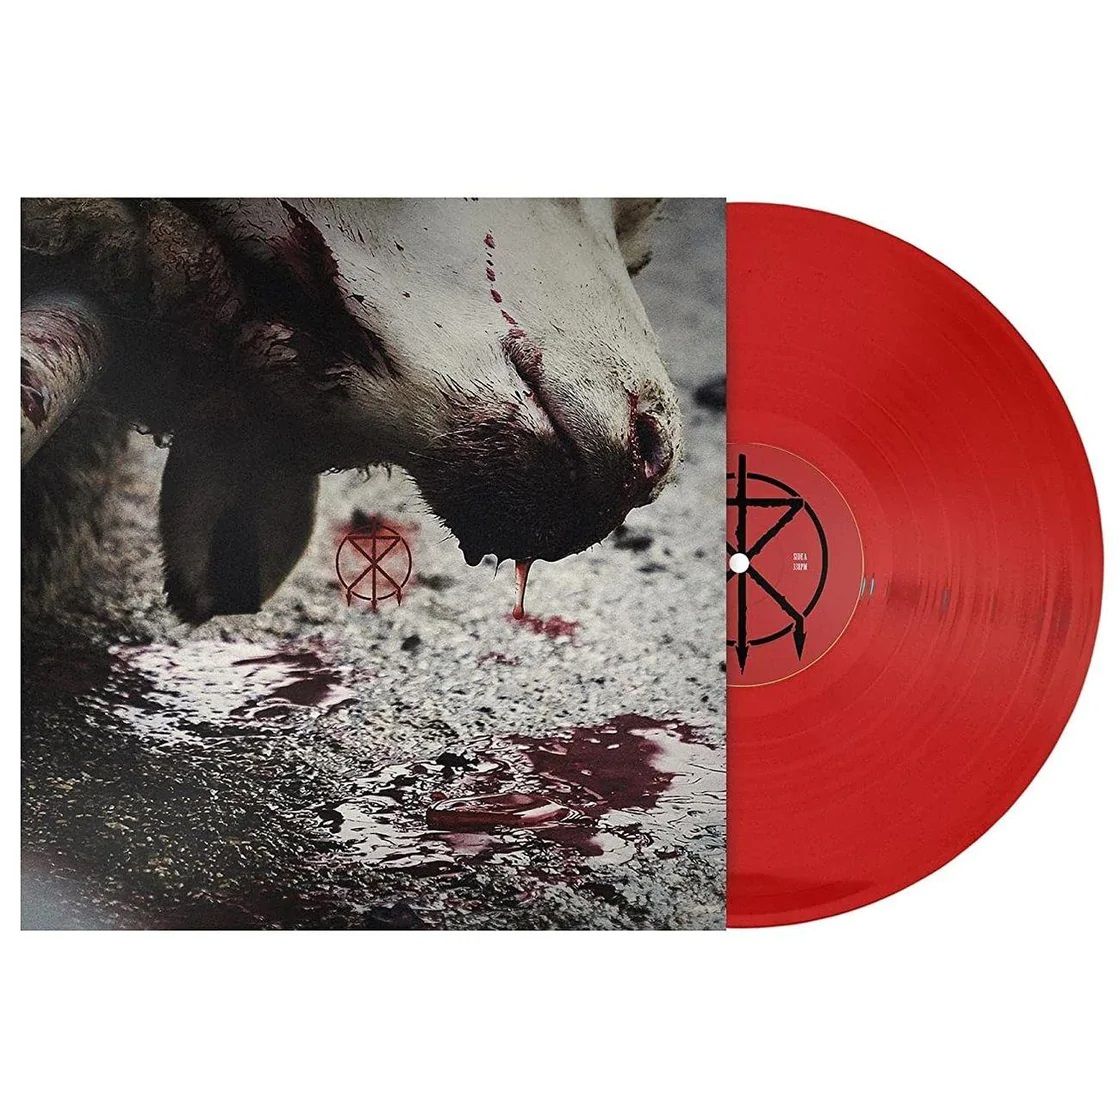 To The Grave - Director's Cuts (Red Dot Sight vinyl gatefold) - Vinyl - New